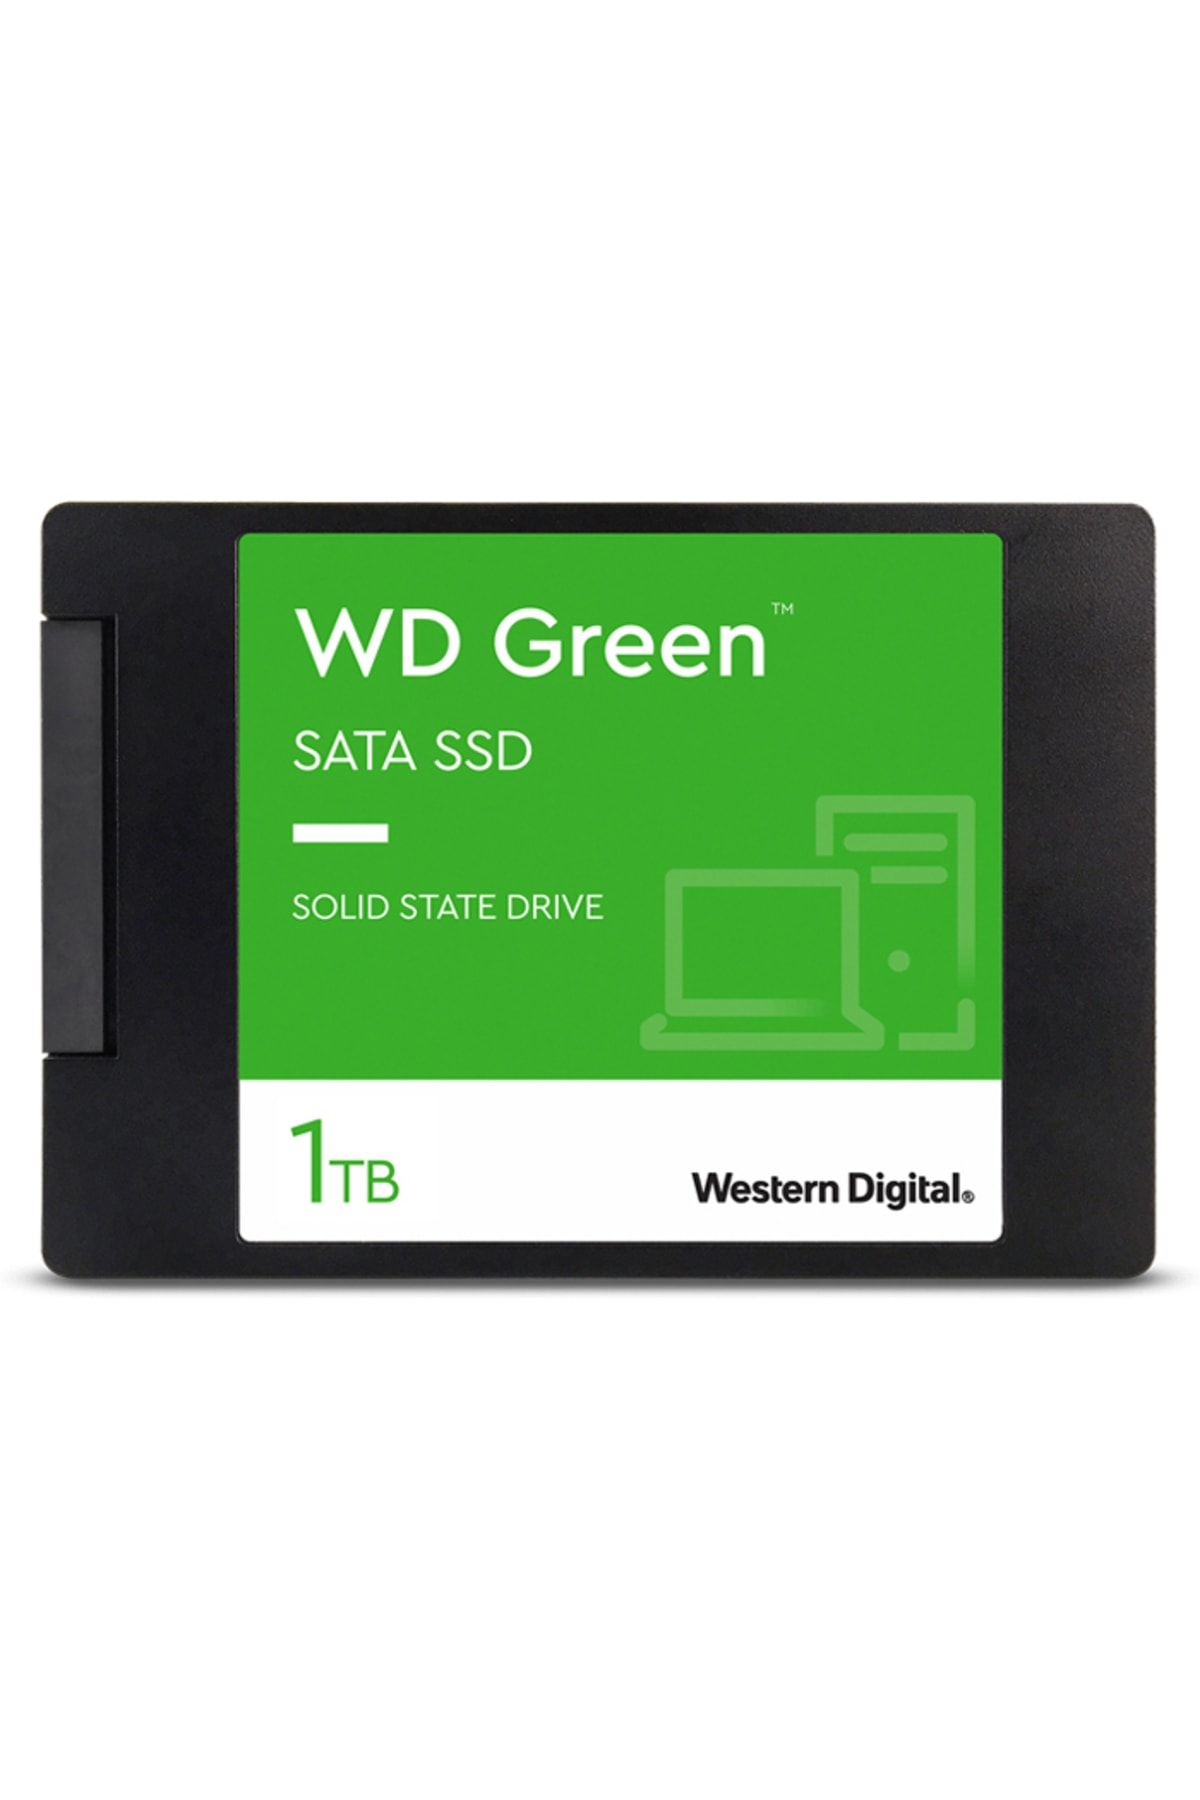 WD Green S100t3g0a 1tb 545mb/s 2.5" Sata 3 Ssd Disk